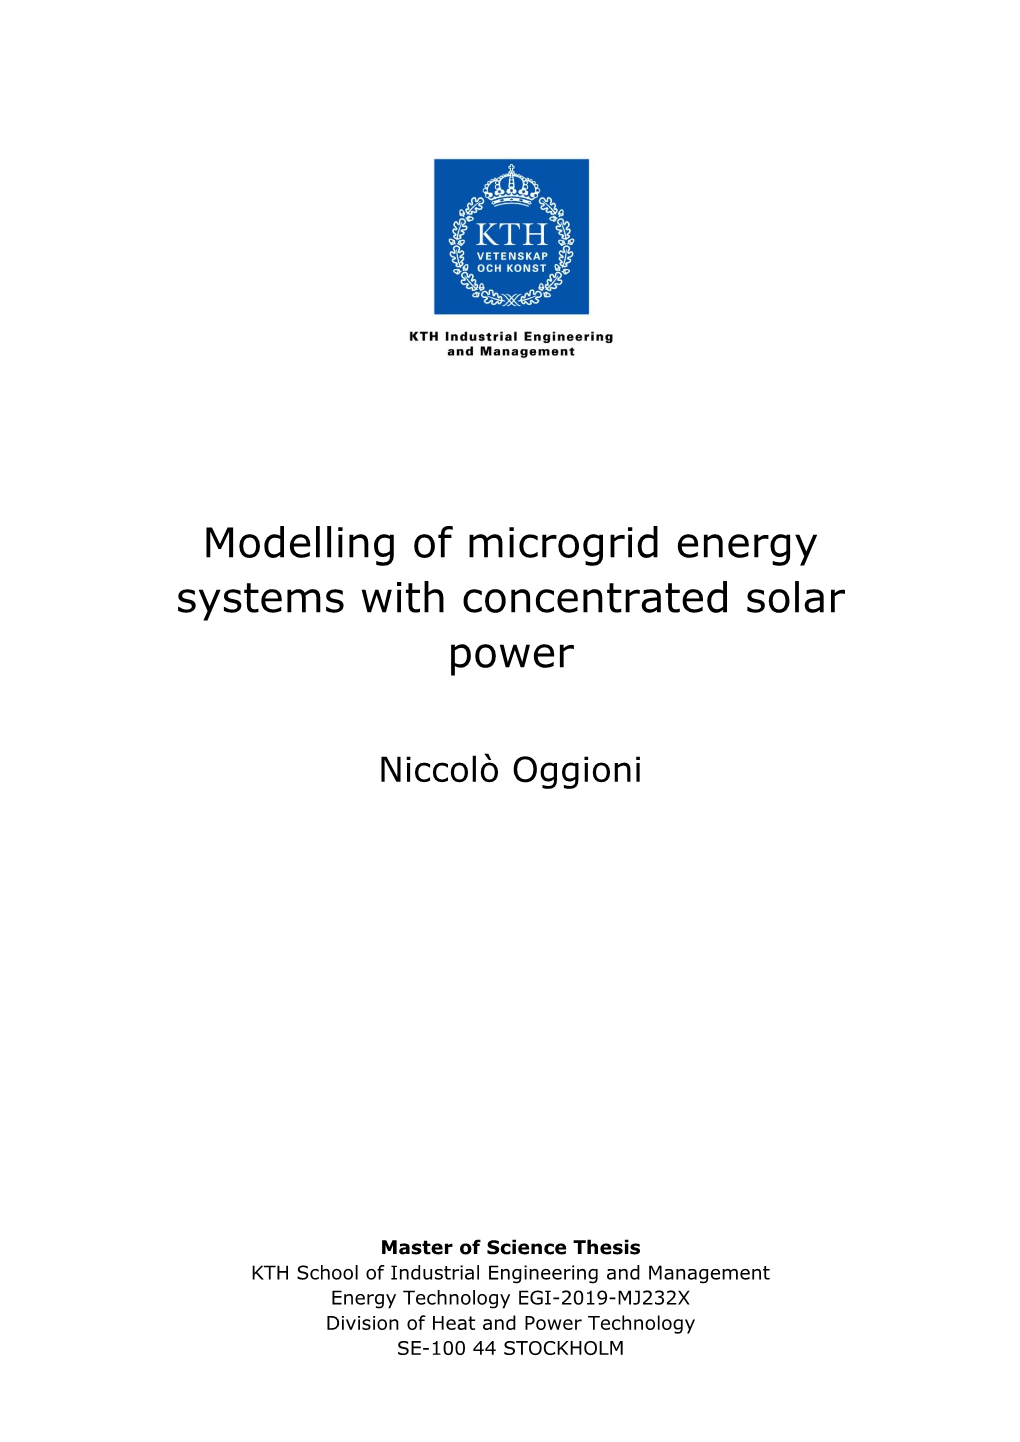 Modelling of Microgrid Energy Systems with Concentrated Solar Power